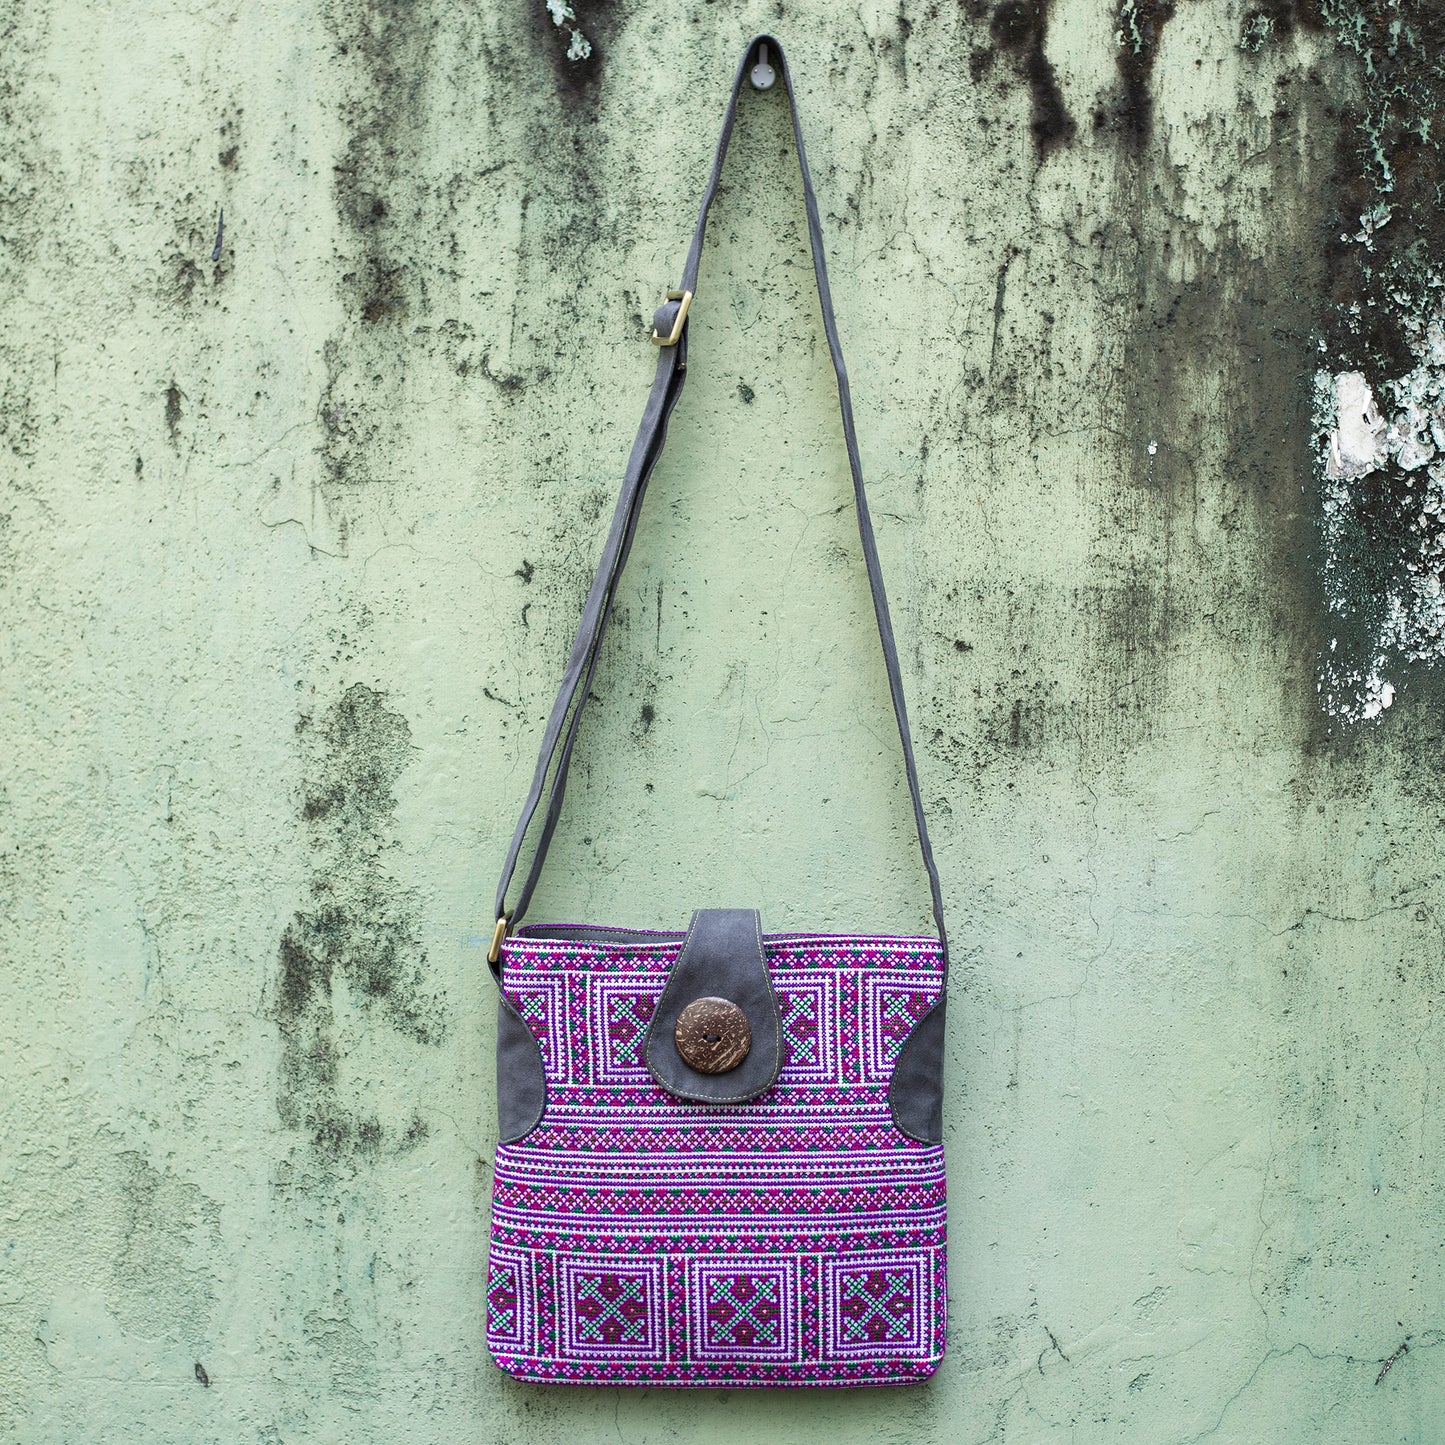 Purple embroidery cross-body bag, faux leather straps, coconut button